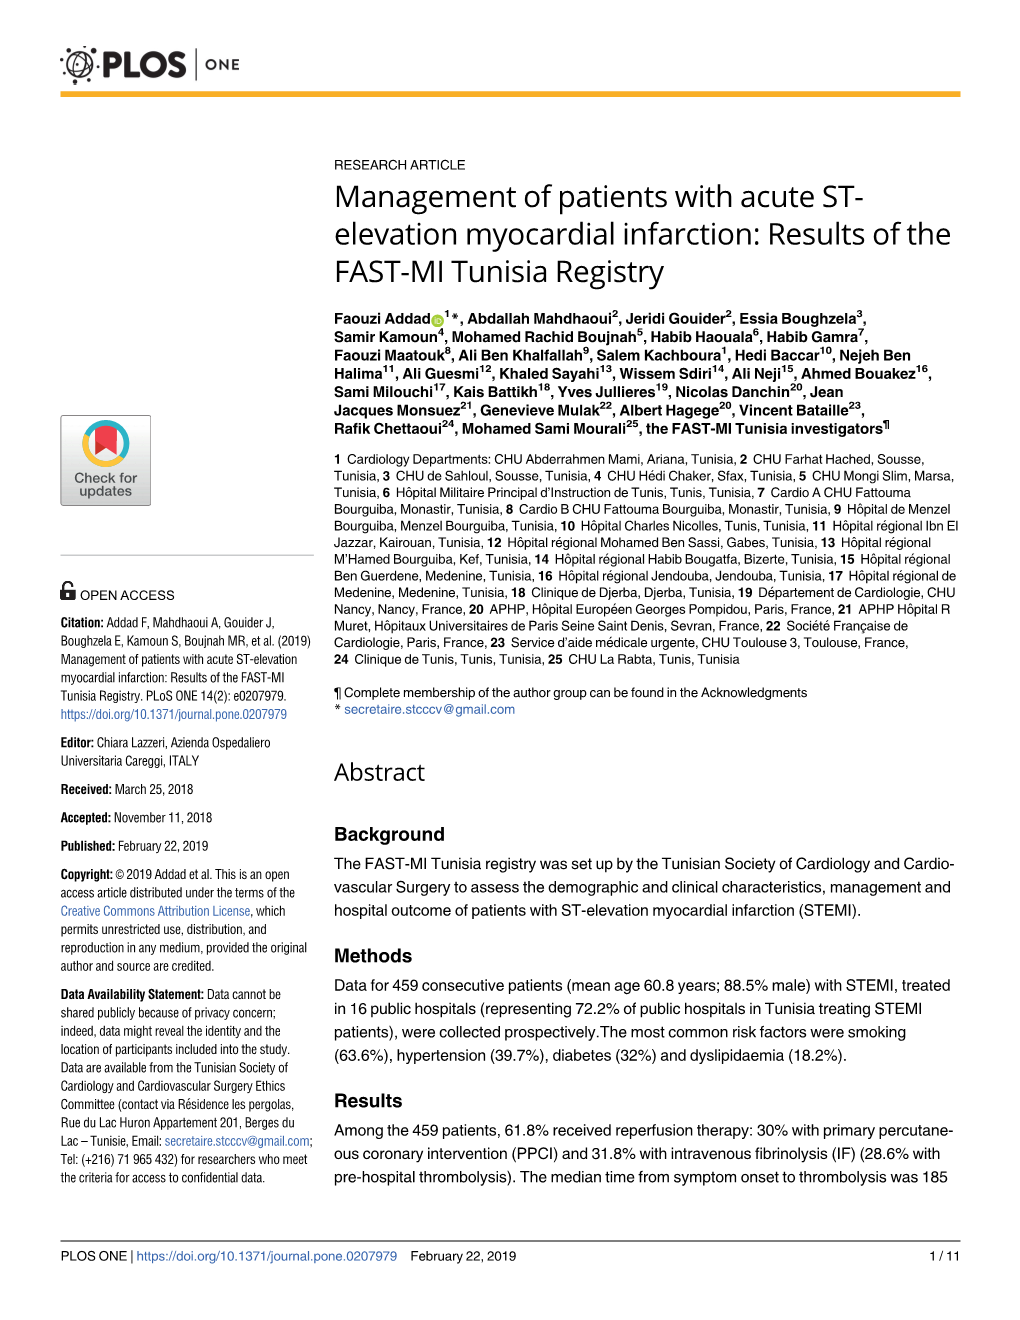 Management of Patients with Acute ST-Elevation Myocardial Infarction